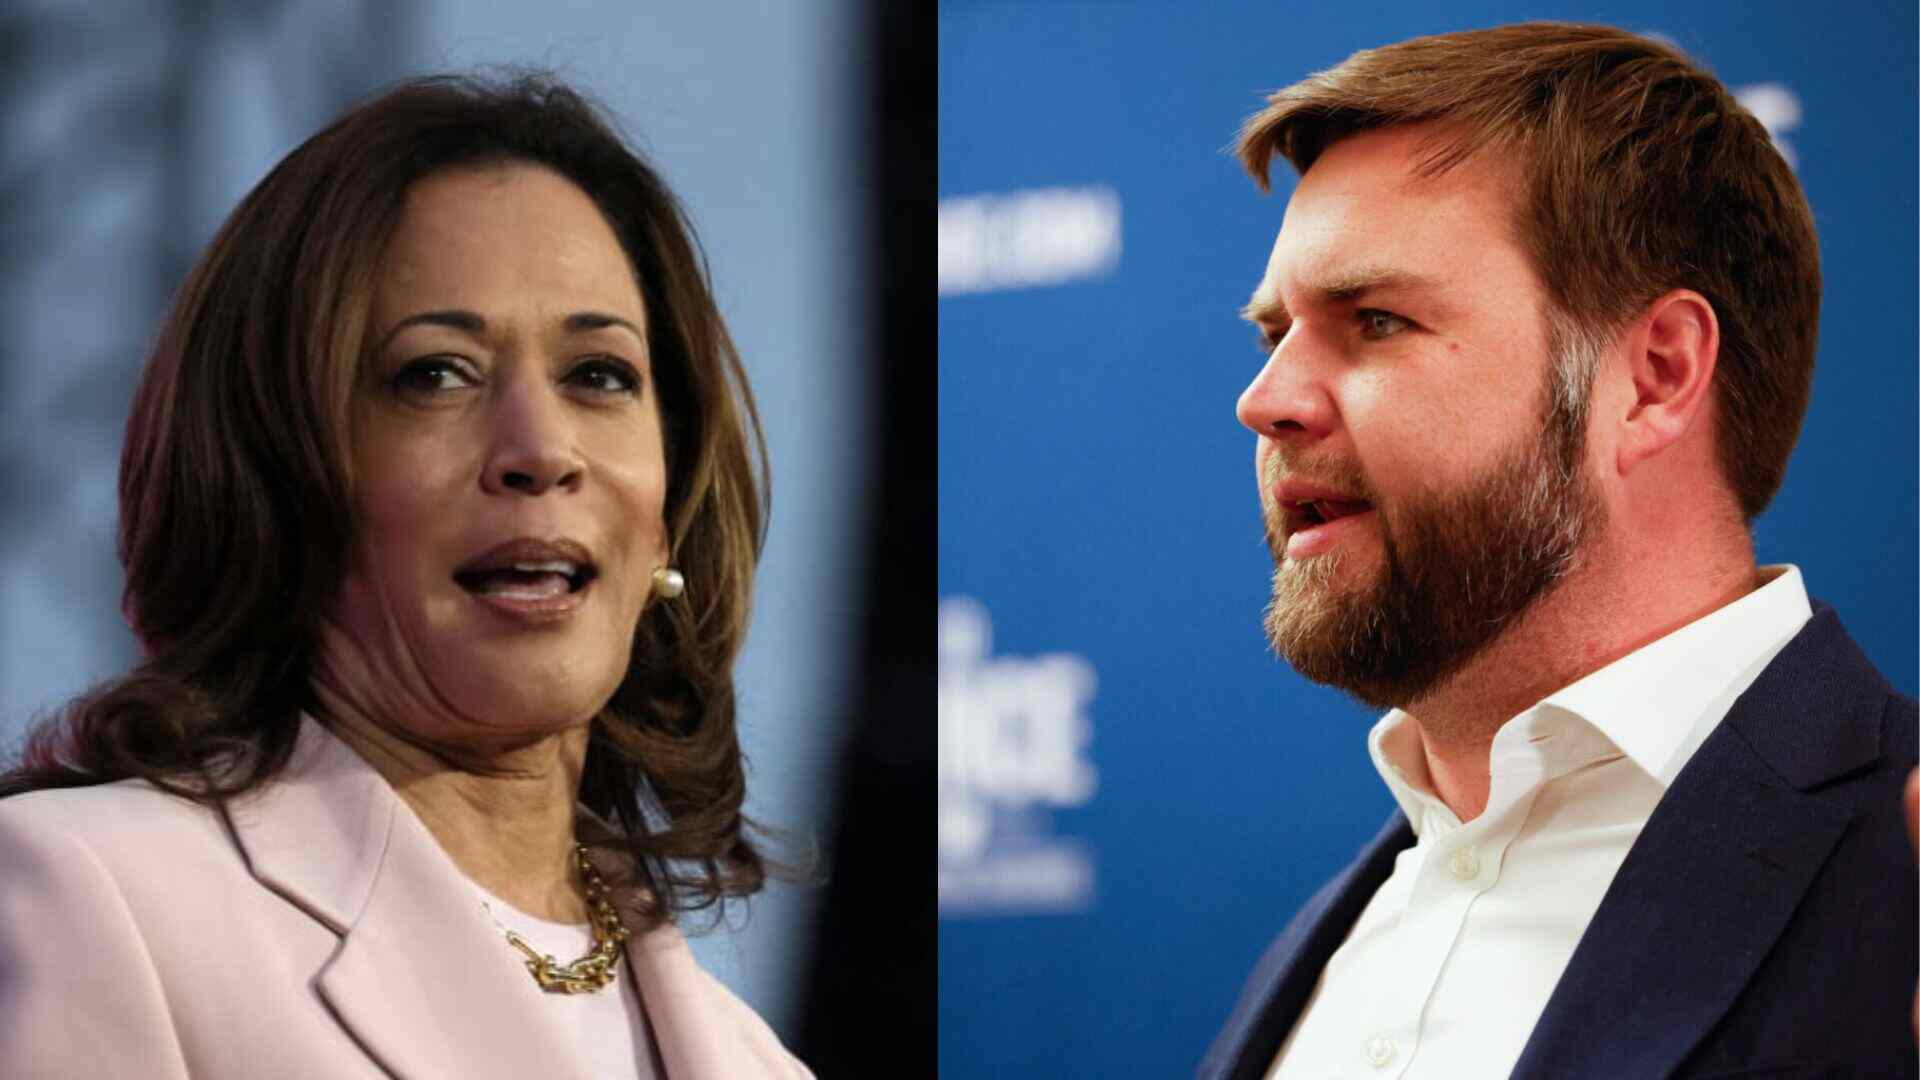 Vance’s ‘Childless Cat Ladies’ Remark Ignites Backlash From Harris Supporters